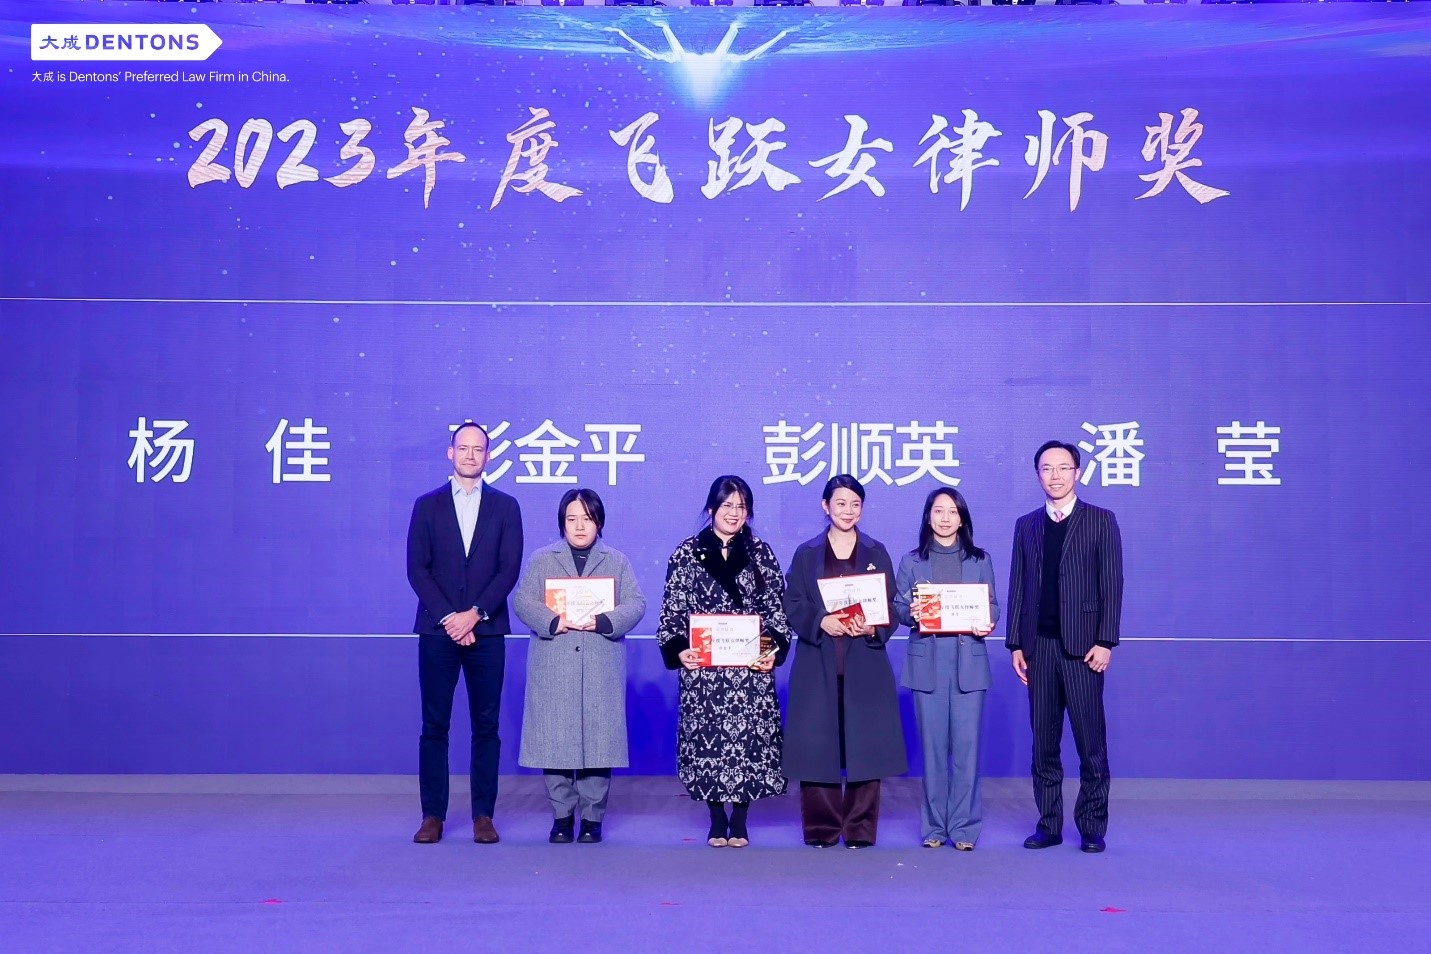 Robert Rhoda presented the Rising Star Lawyer Award to a distinguished female lawyer from Dacheng Guangzhou Office in 2023